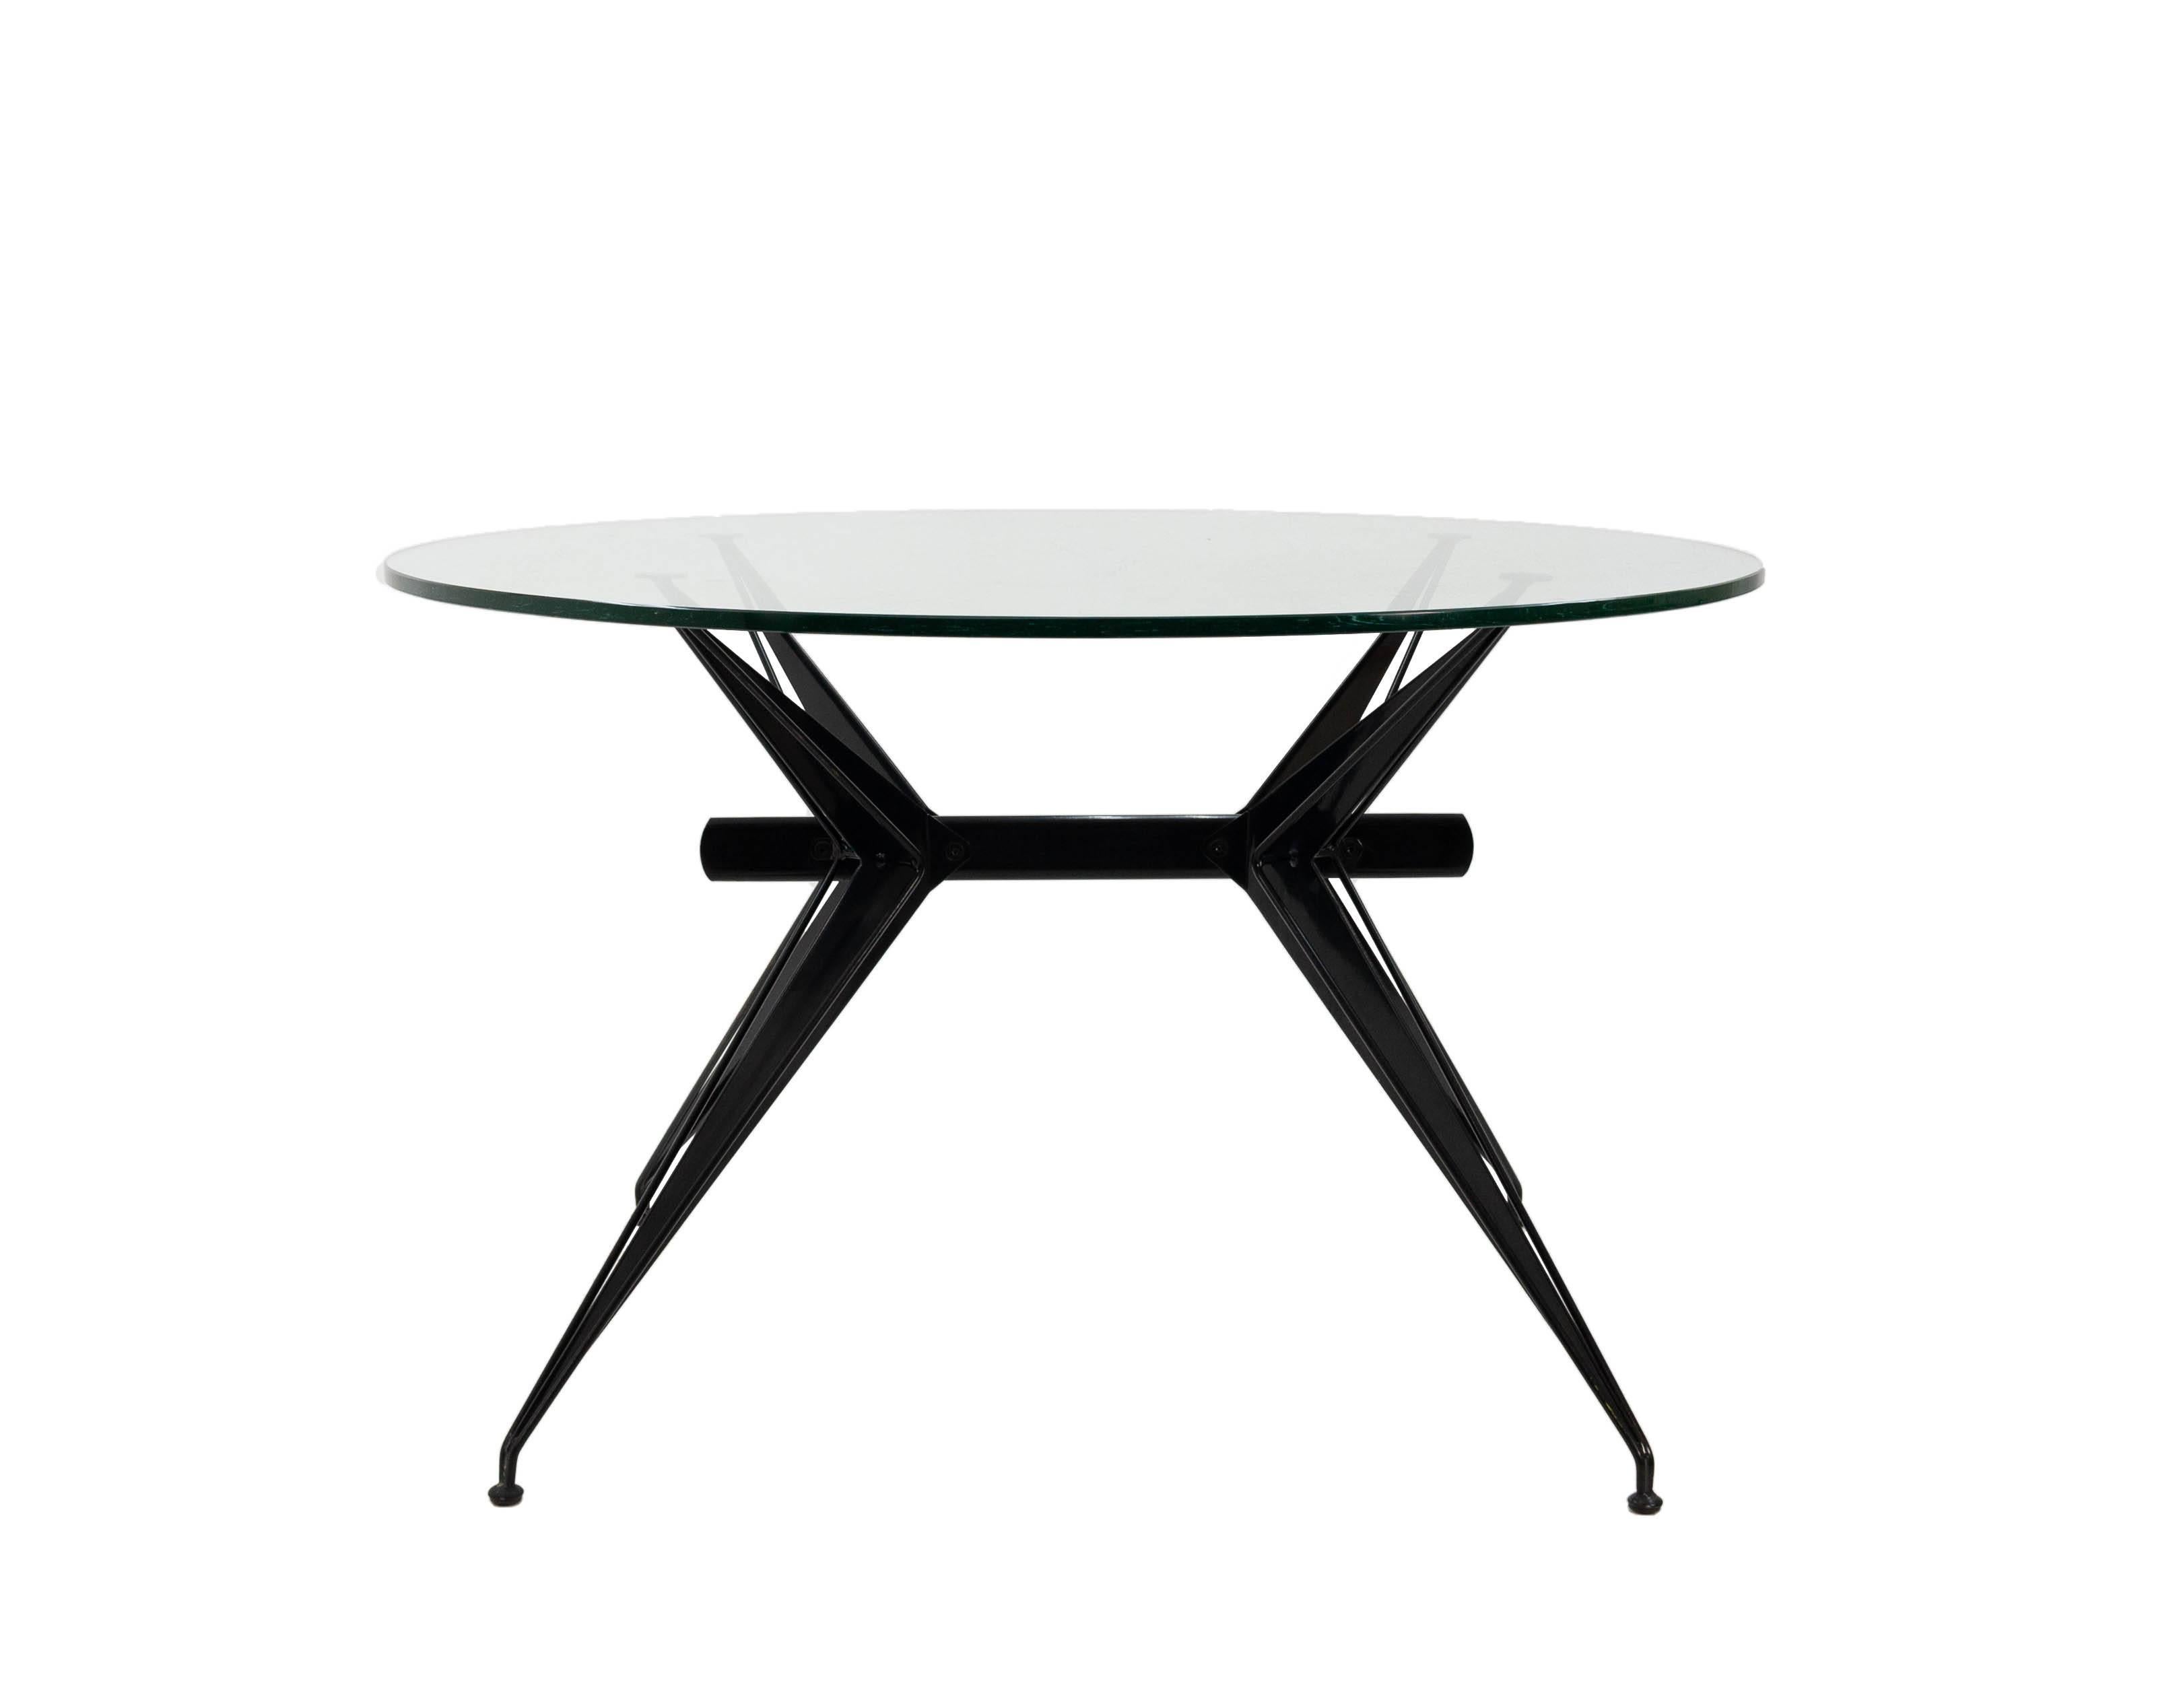 Striking Italian modernist table in the style of Osvaldo Borsani's works for Tecno. Intricately shaped steel construction with the original 3cm thick cut-glass top.